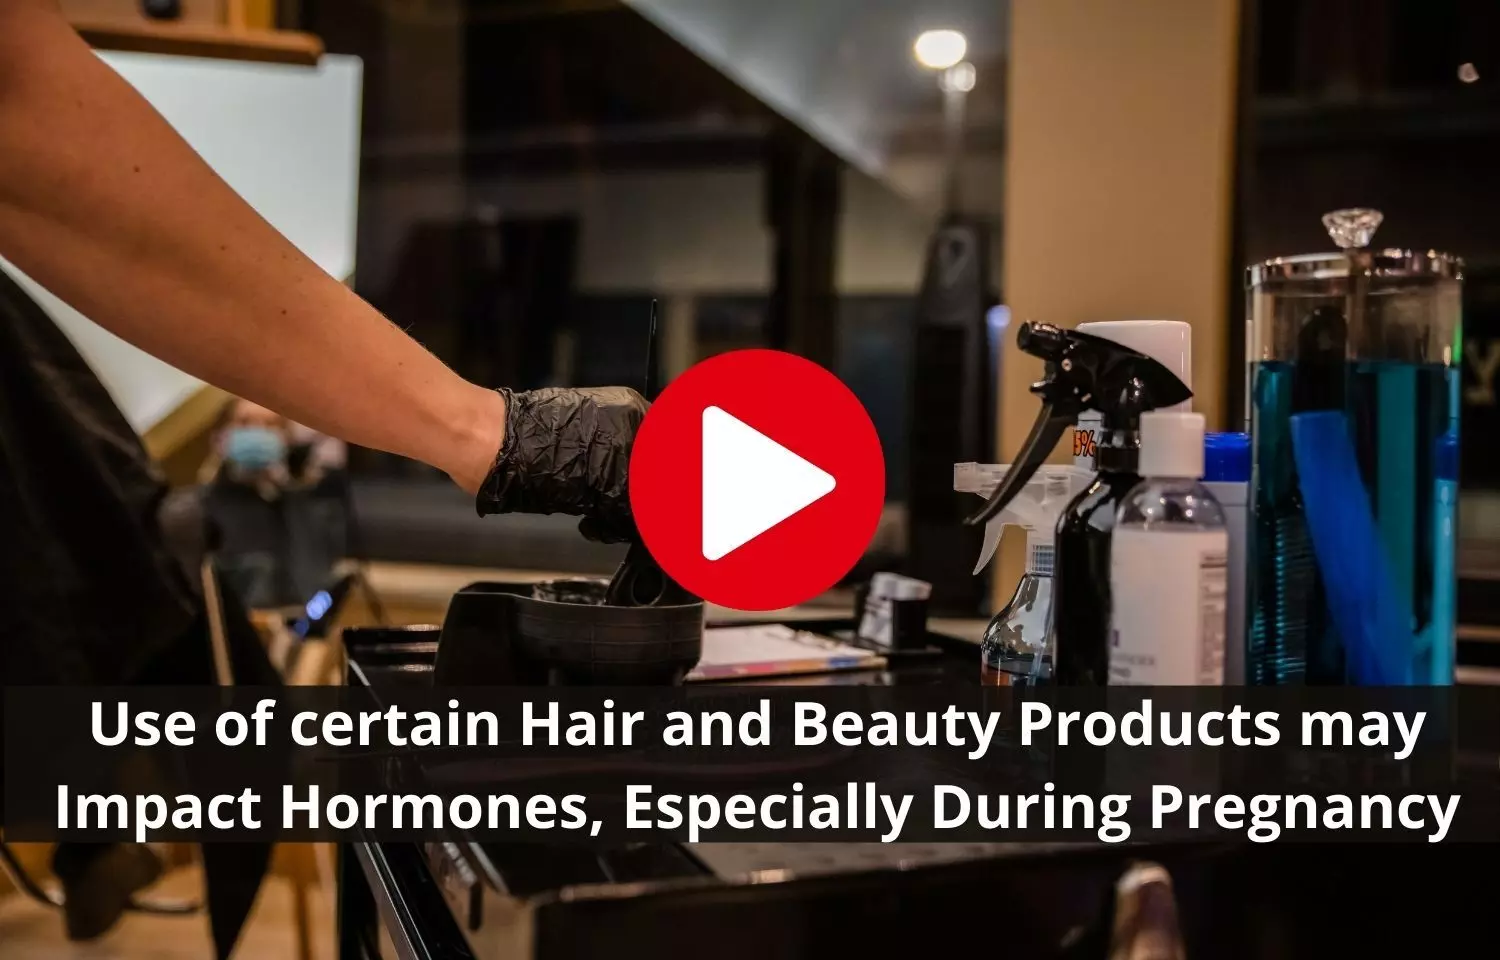 Hair, Beauty Products impact female hormones specially during pregnancy